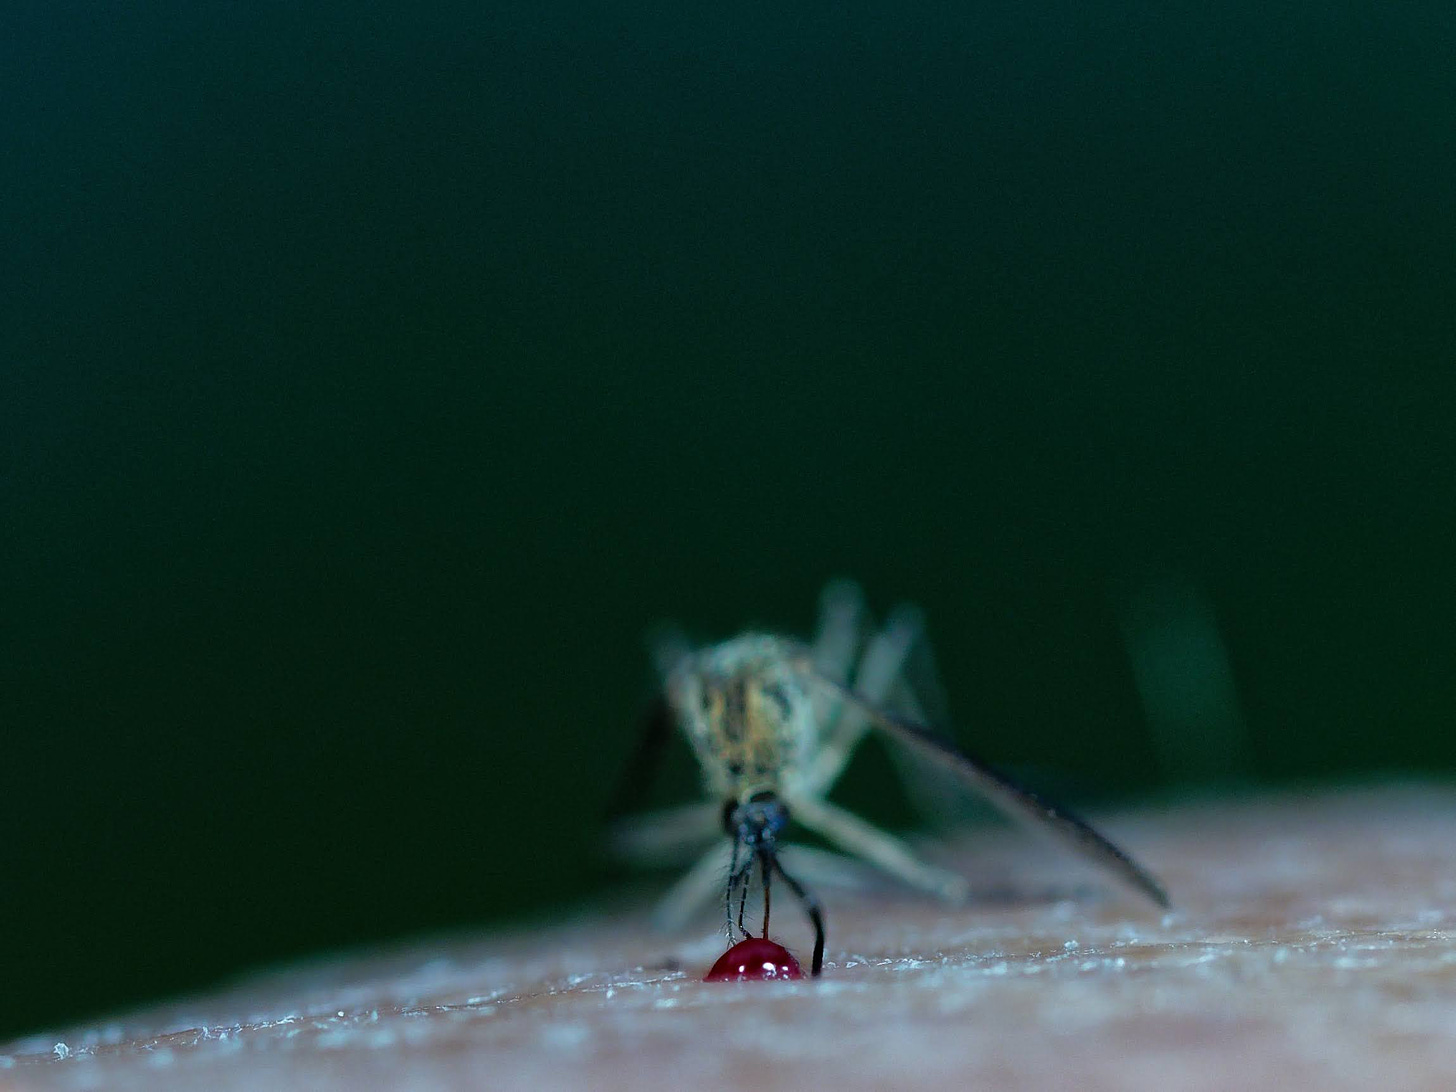 Mosquito with drop of blood